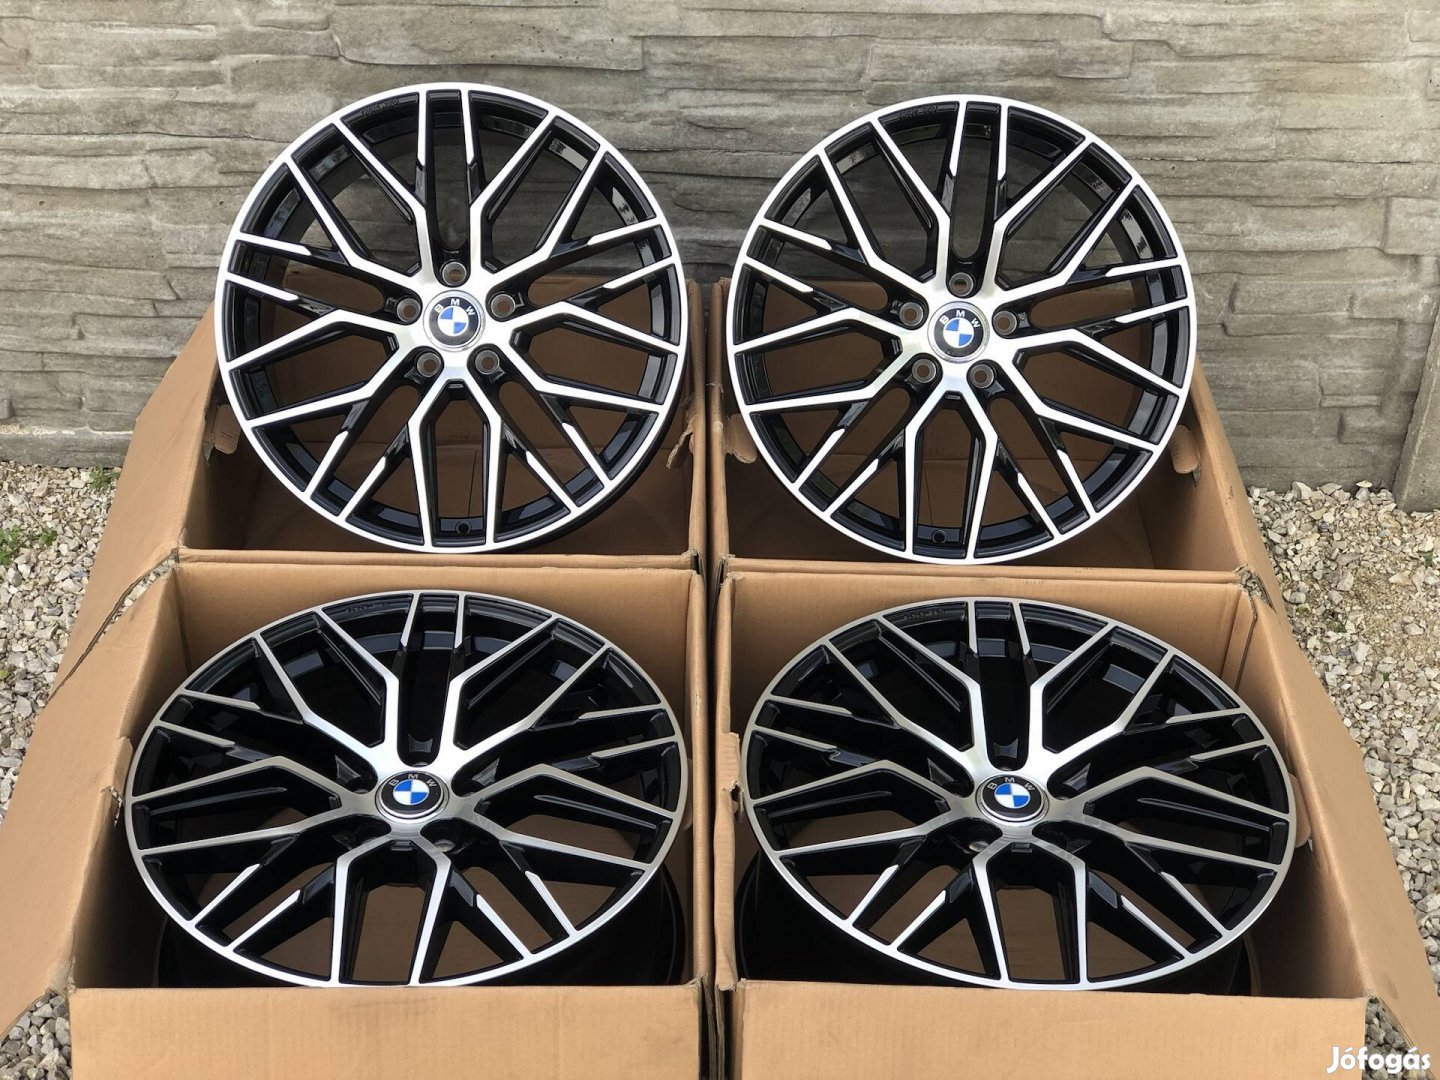 5x120 19" MaM Rs4 MaM Rs4 Bmw Vw Transporter T5 T6 Opel Insignia 